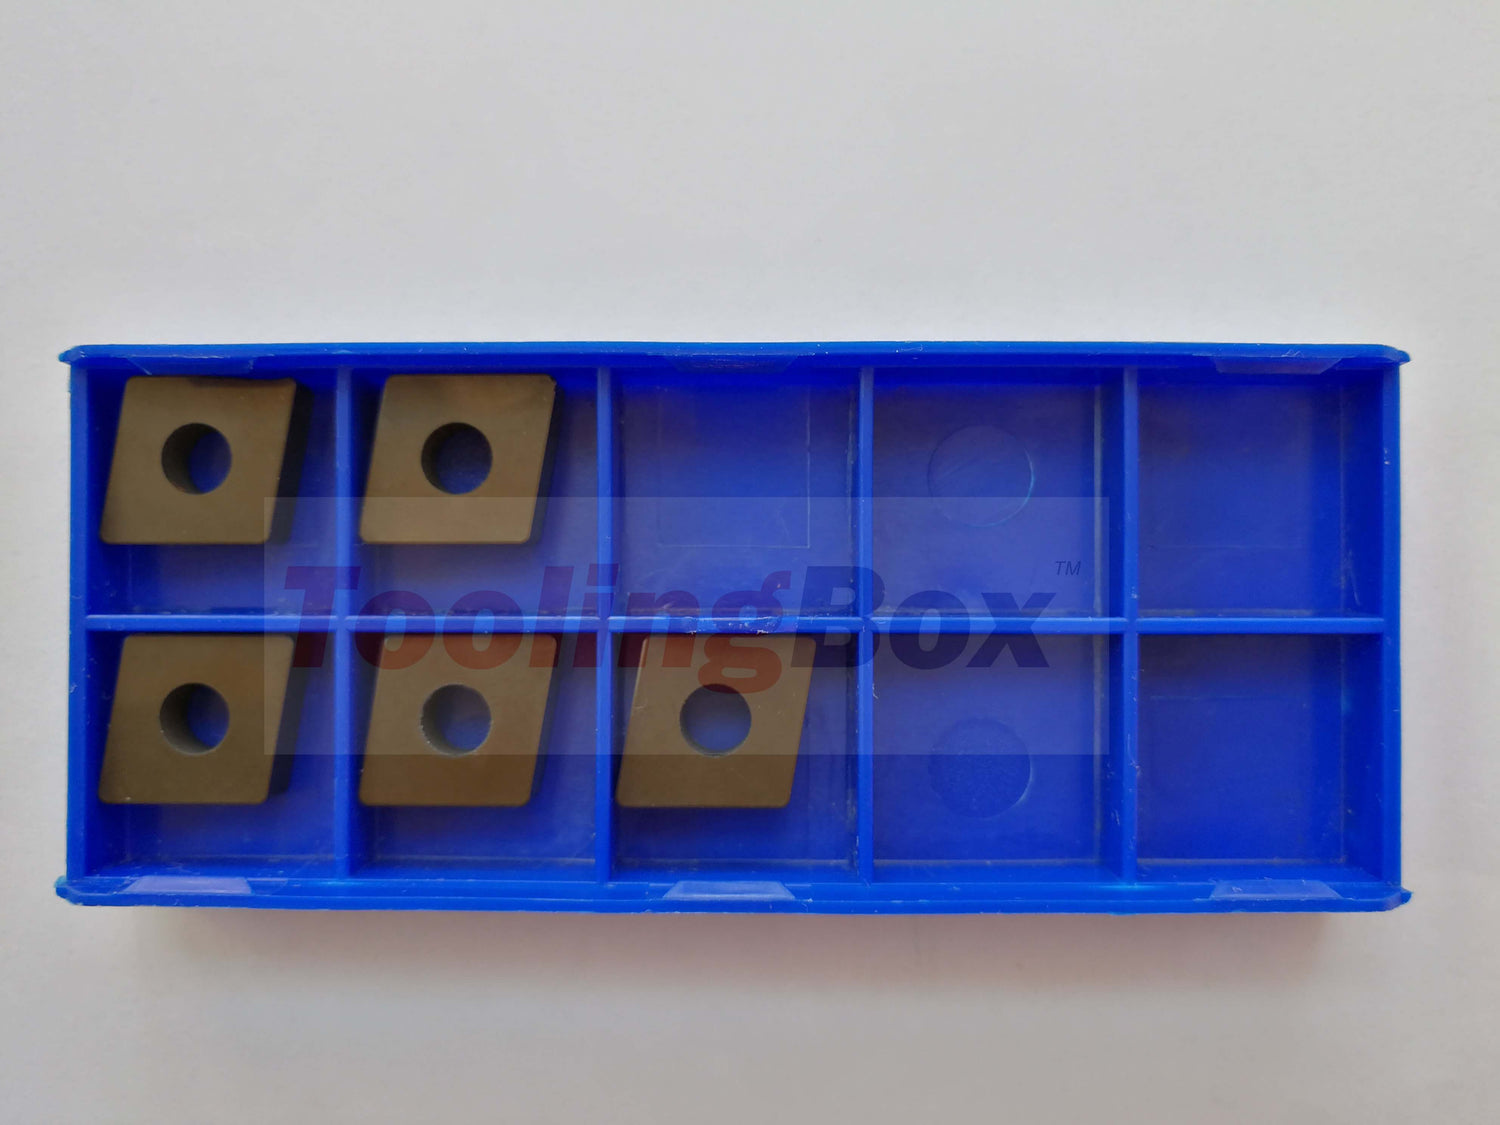 10 pcs packing full CBN inserts CNMG 1204 TB100 with straight hole